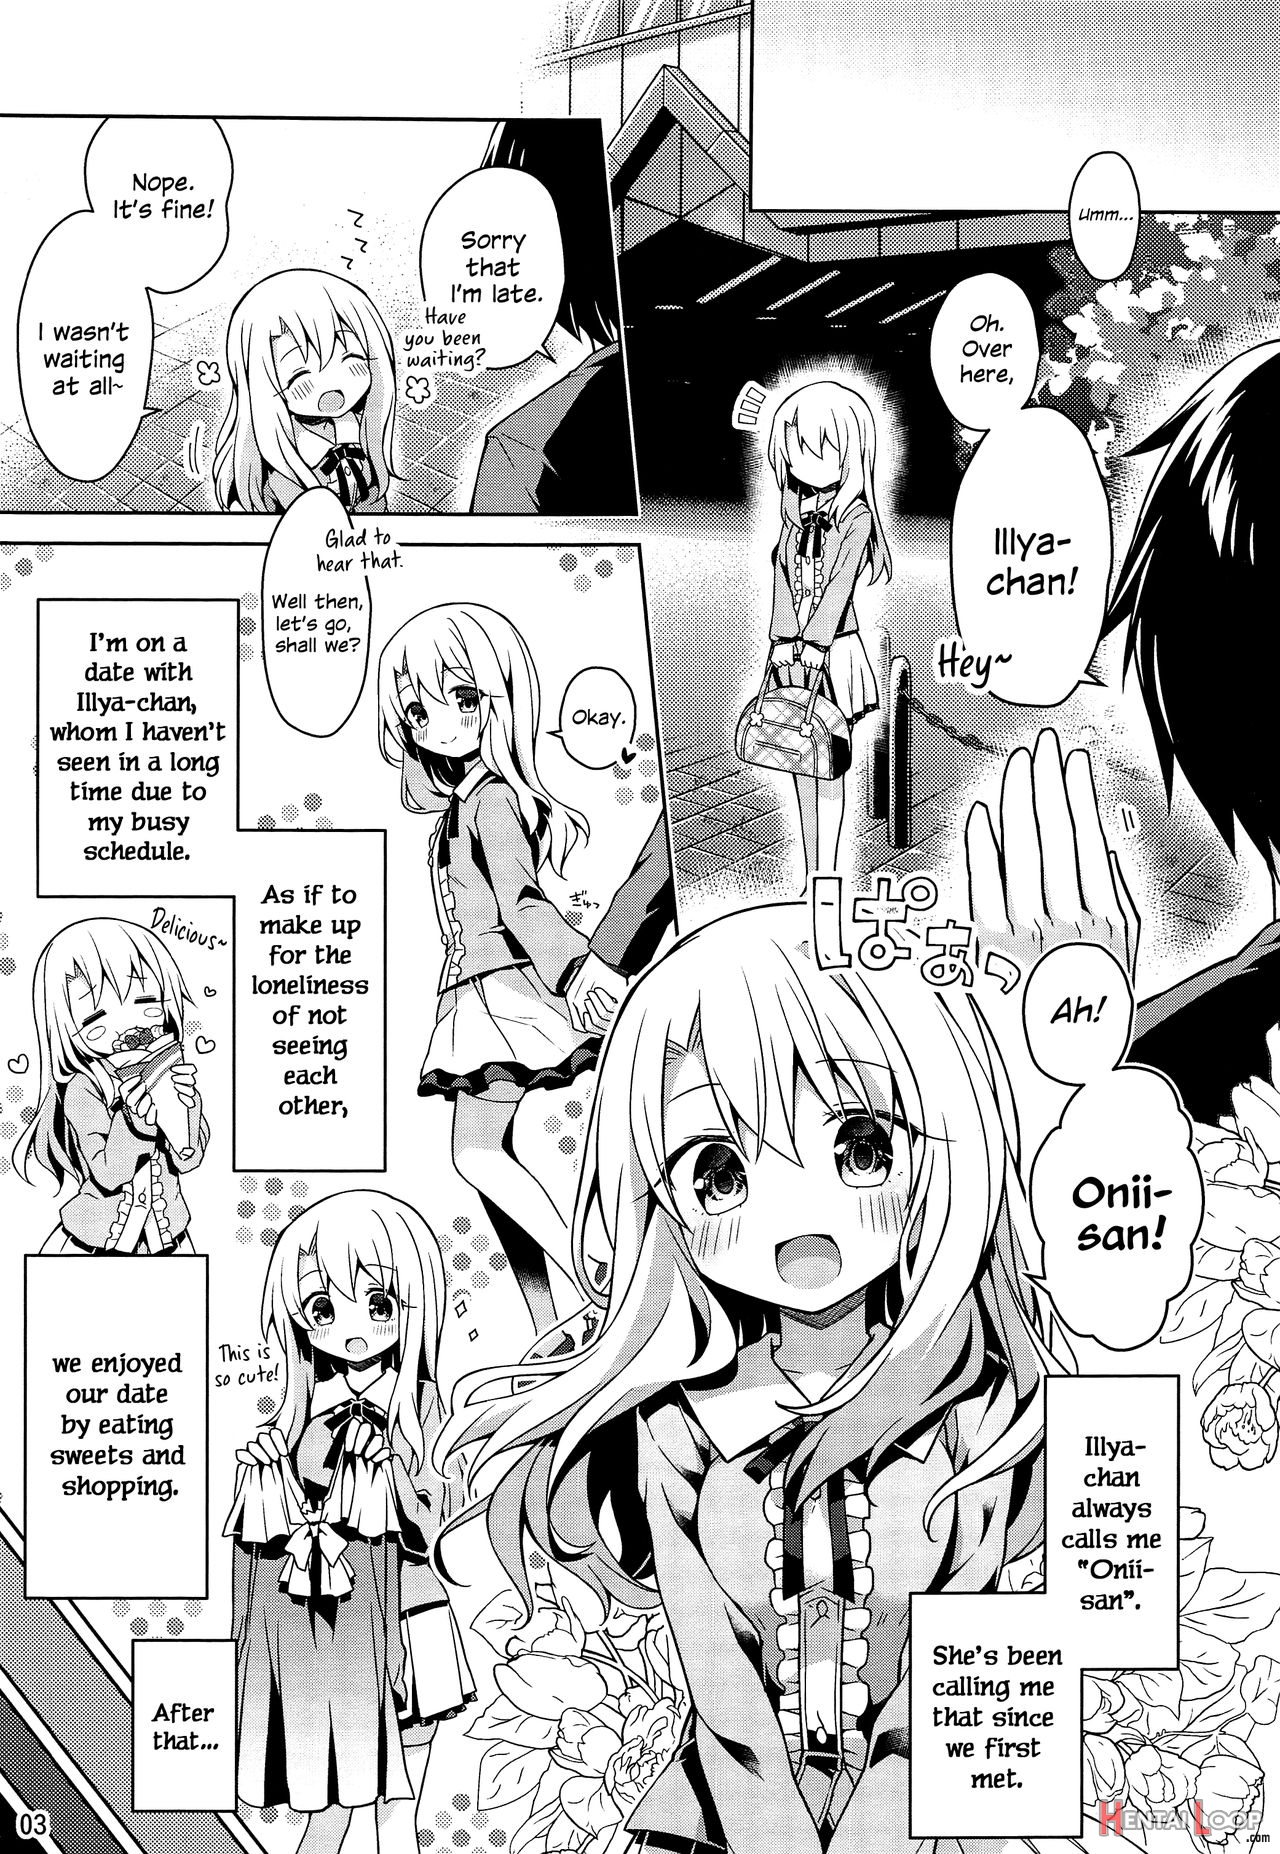 I Want To Make Love With Illya At My Place!! page 4